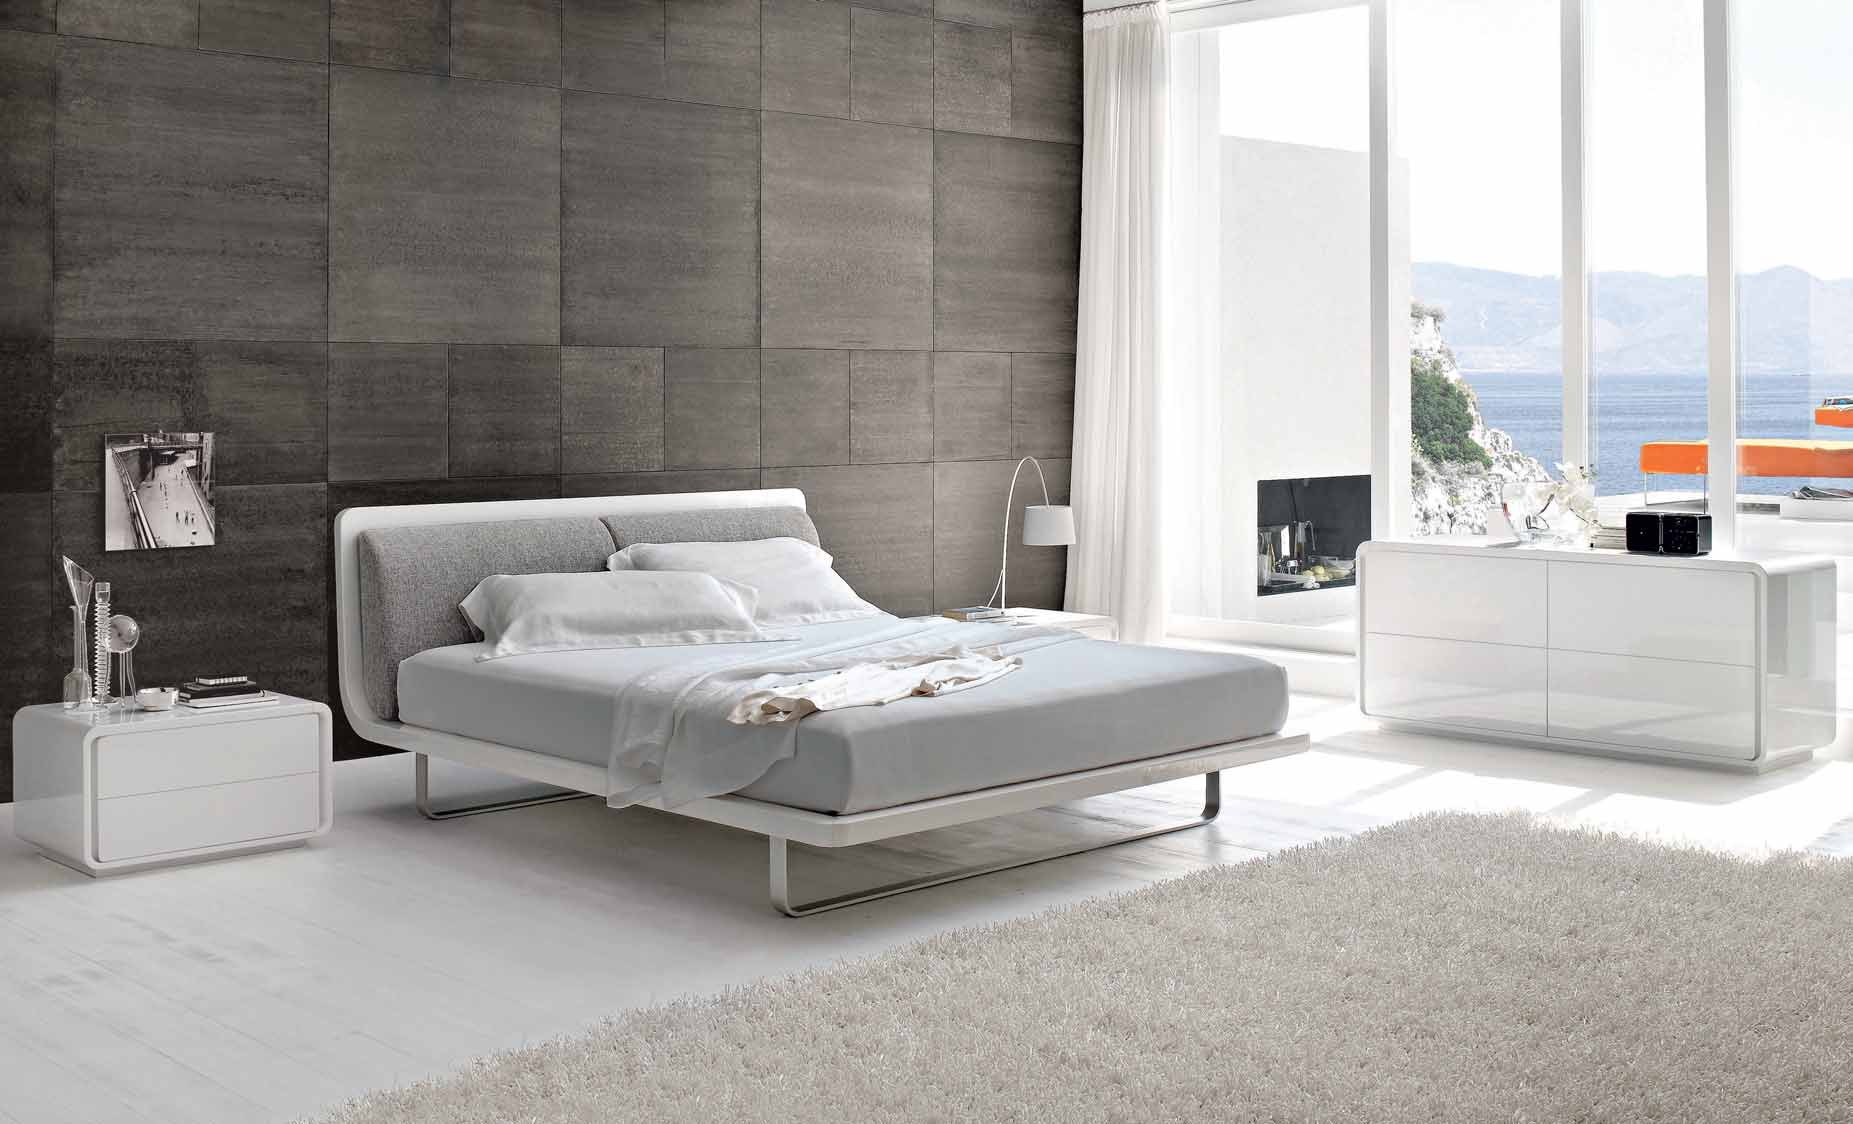 4 Letto PLAZA UP bed / cama.